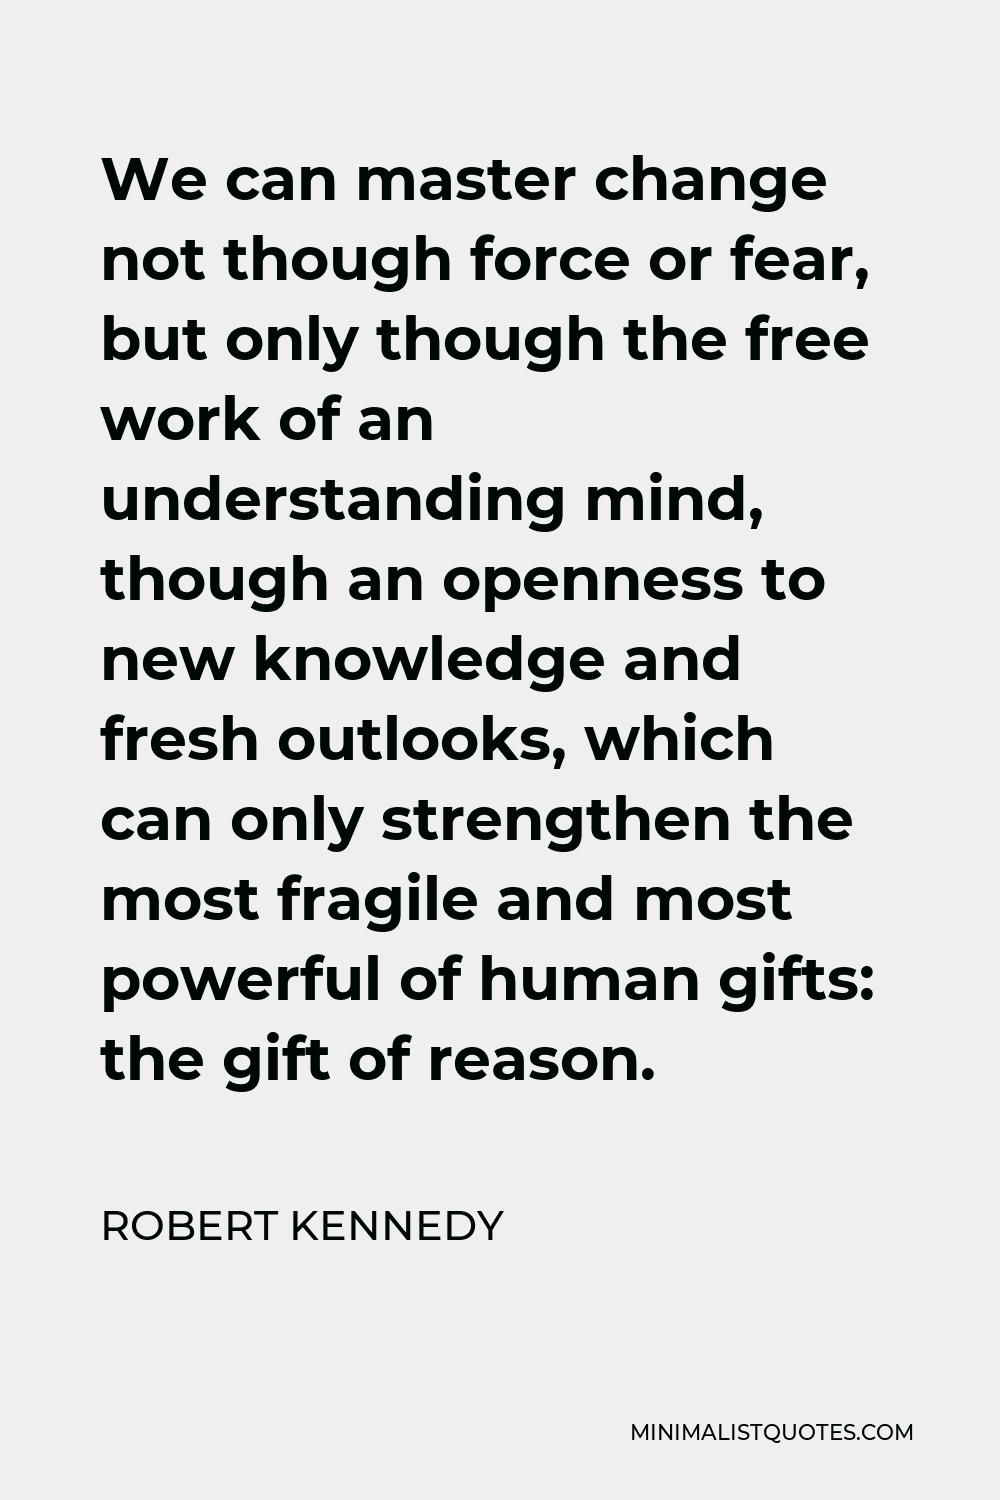 Robert Kennedy Quote - We can master change not though force or fear, but only though the free work of an understanding mind, though an openness to new knowledge and fresh outlooks, which can only strengthen the most fragile and most powerful of human gifts: the gift of reason.